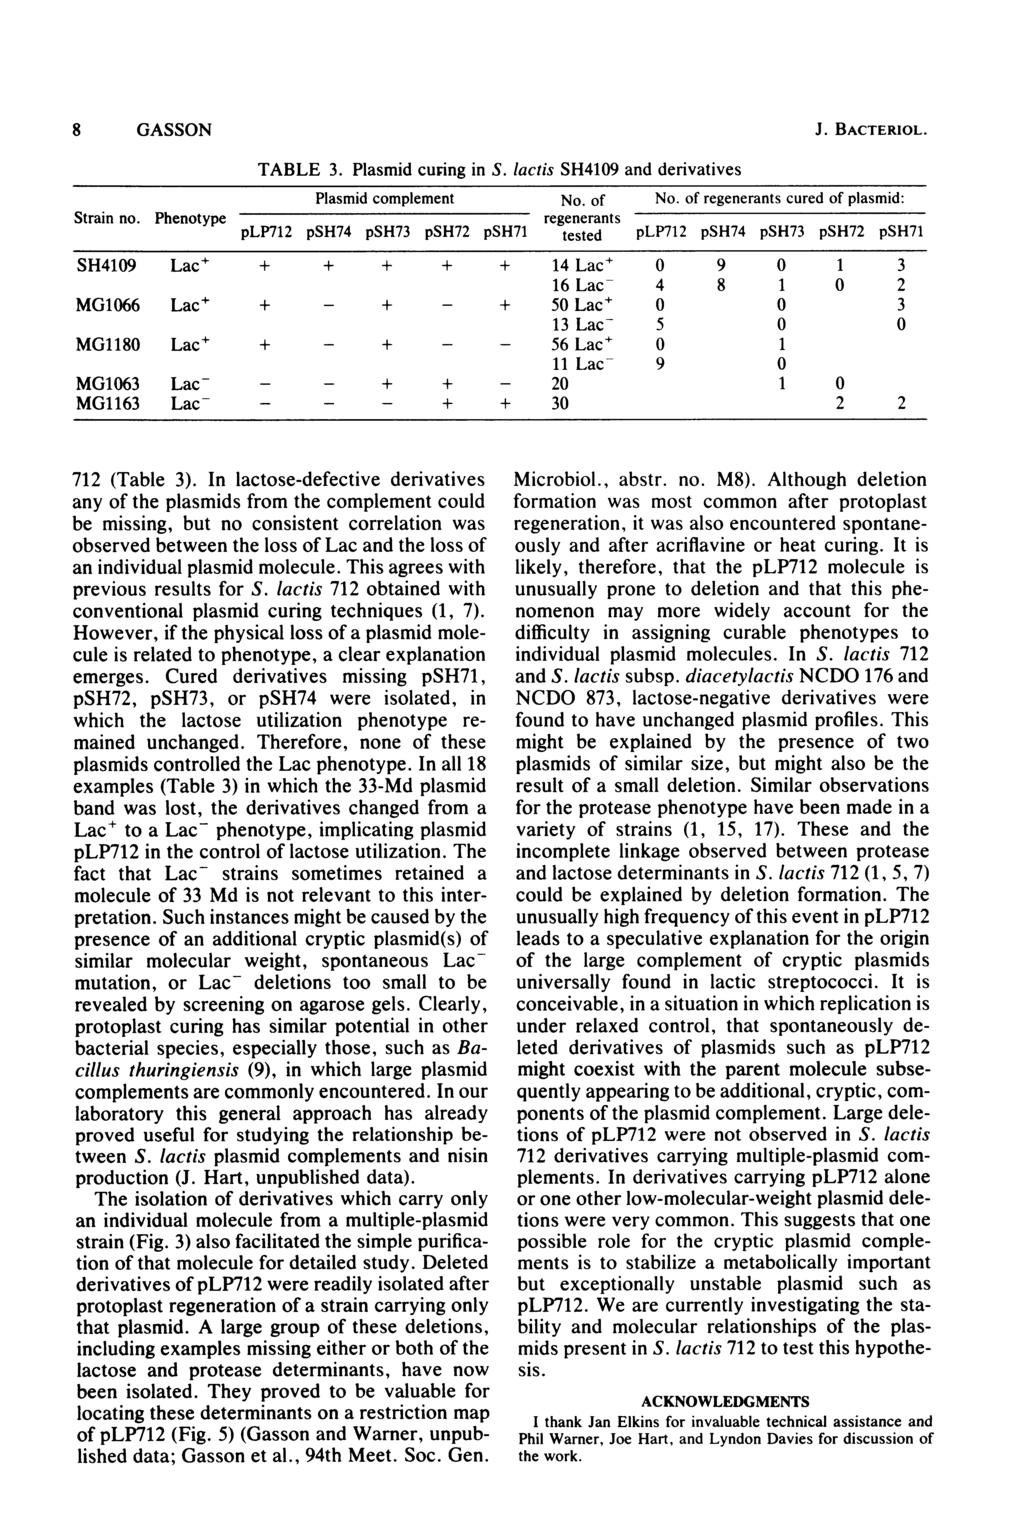 8 GASSON J. BACTERIOL. TABLE 3. Plasmid curing in S. lactis SH4109 and derivatives Plasmid complement No. of No. of regenerants cured of plasmid: Strain no.